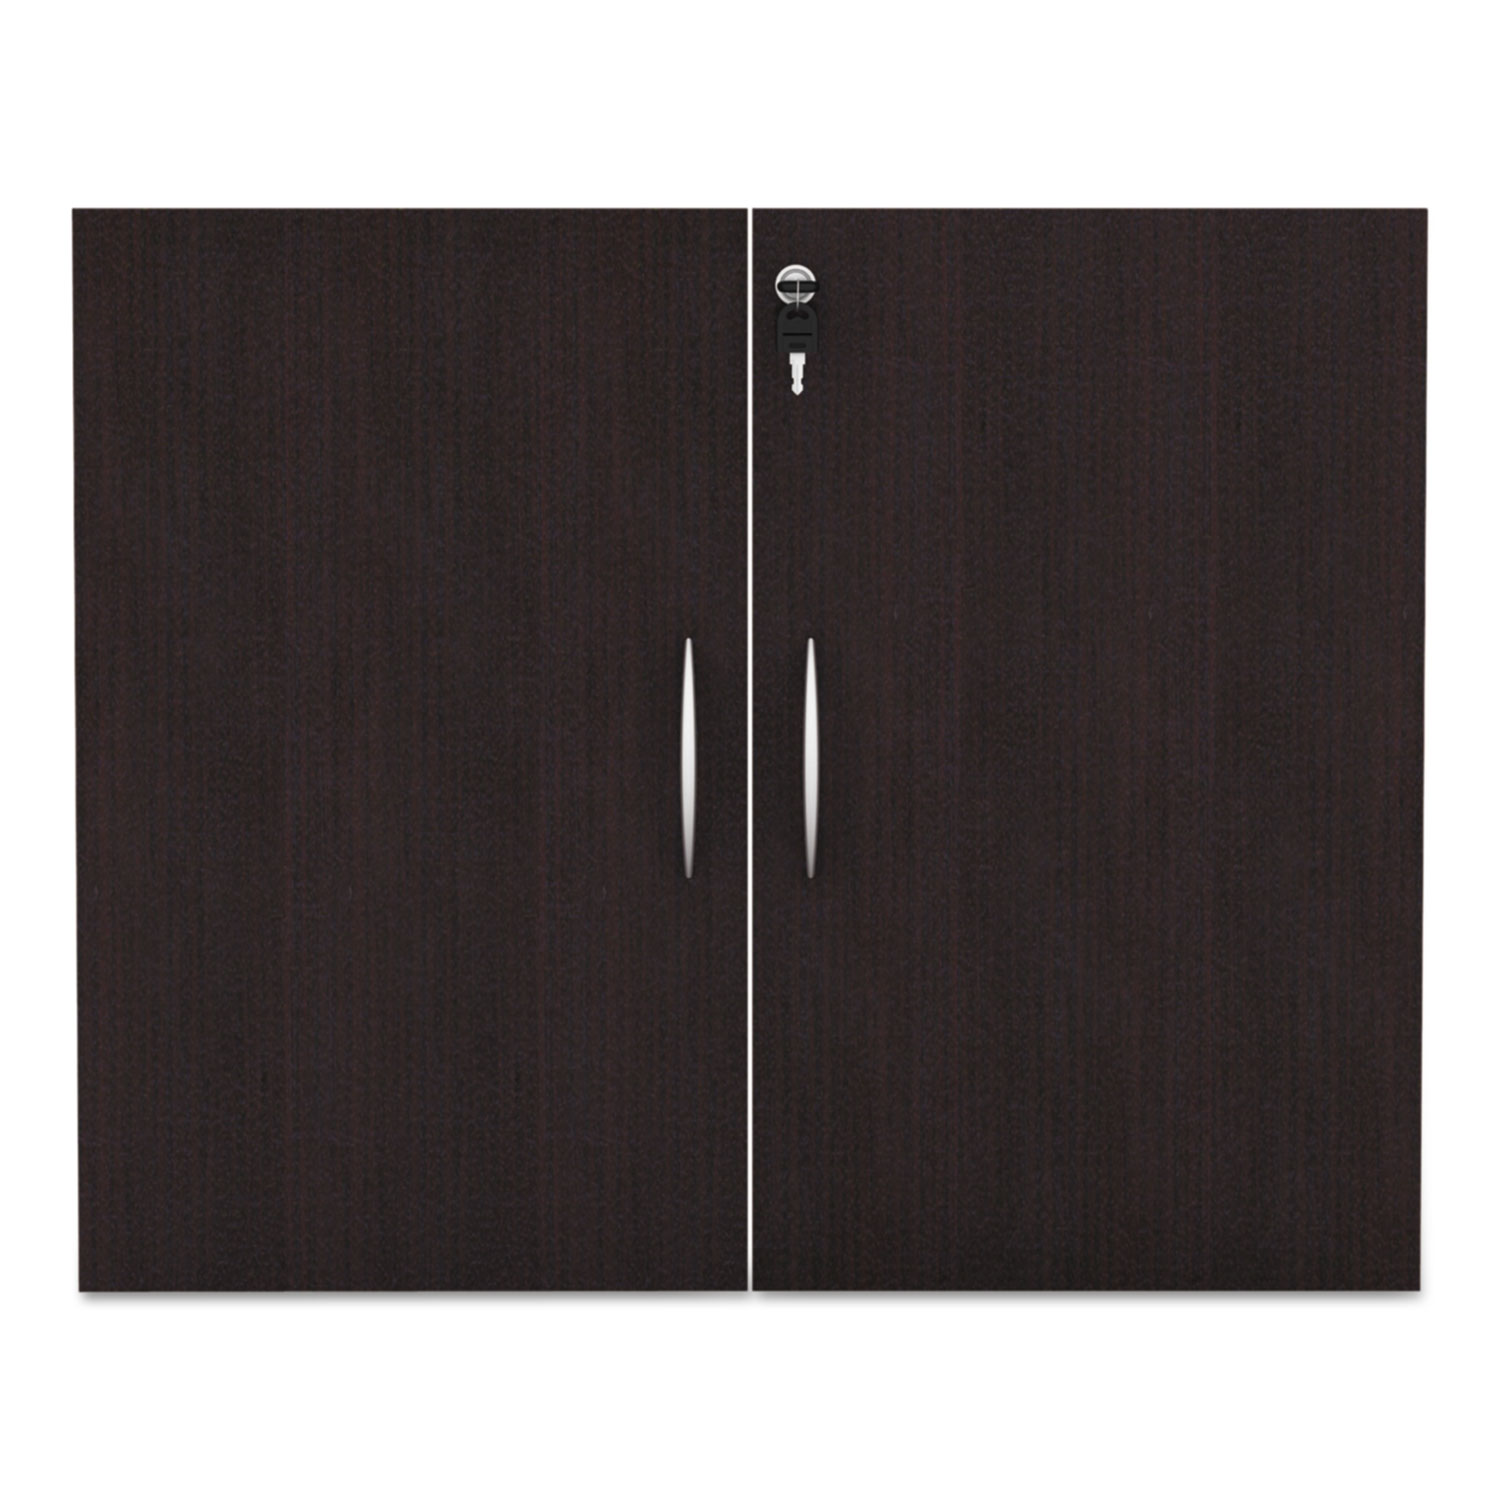 Alera Valencia Series Cabinet Door Kit For All Bookcases, 31 1/4